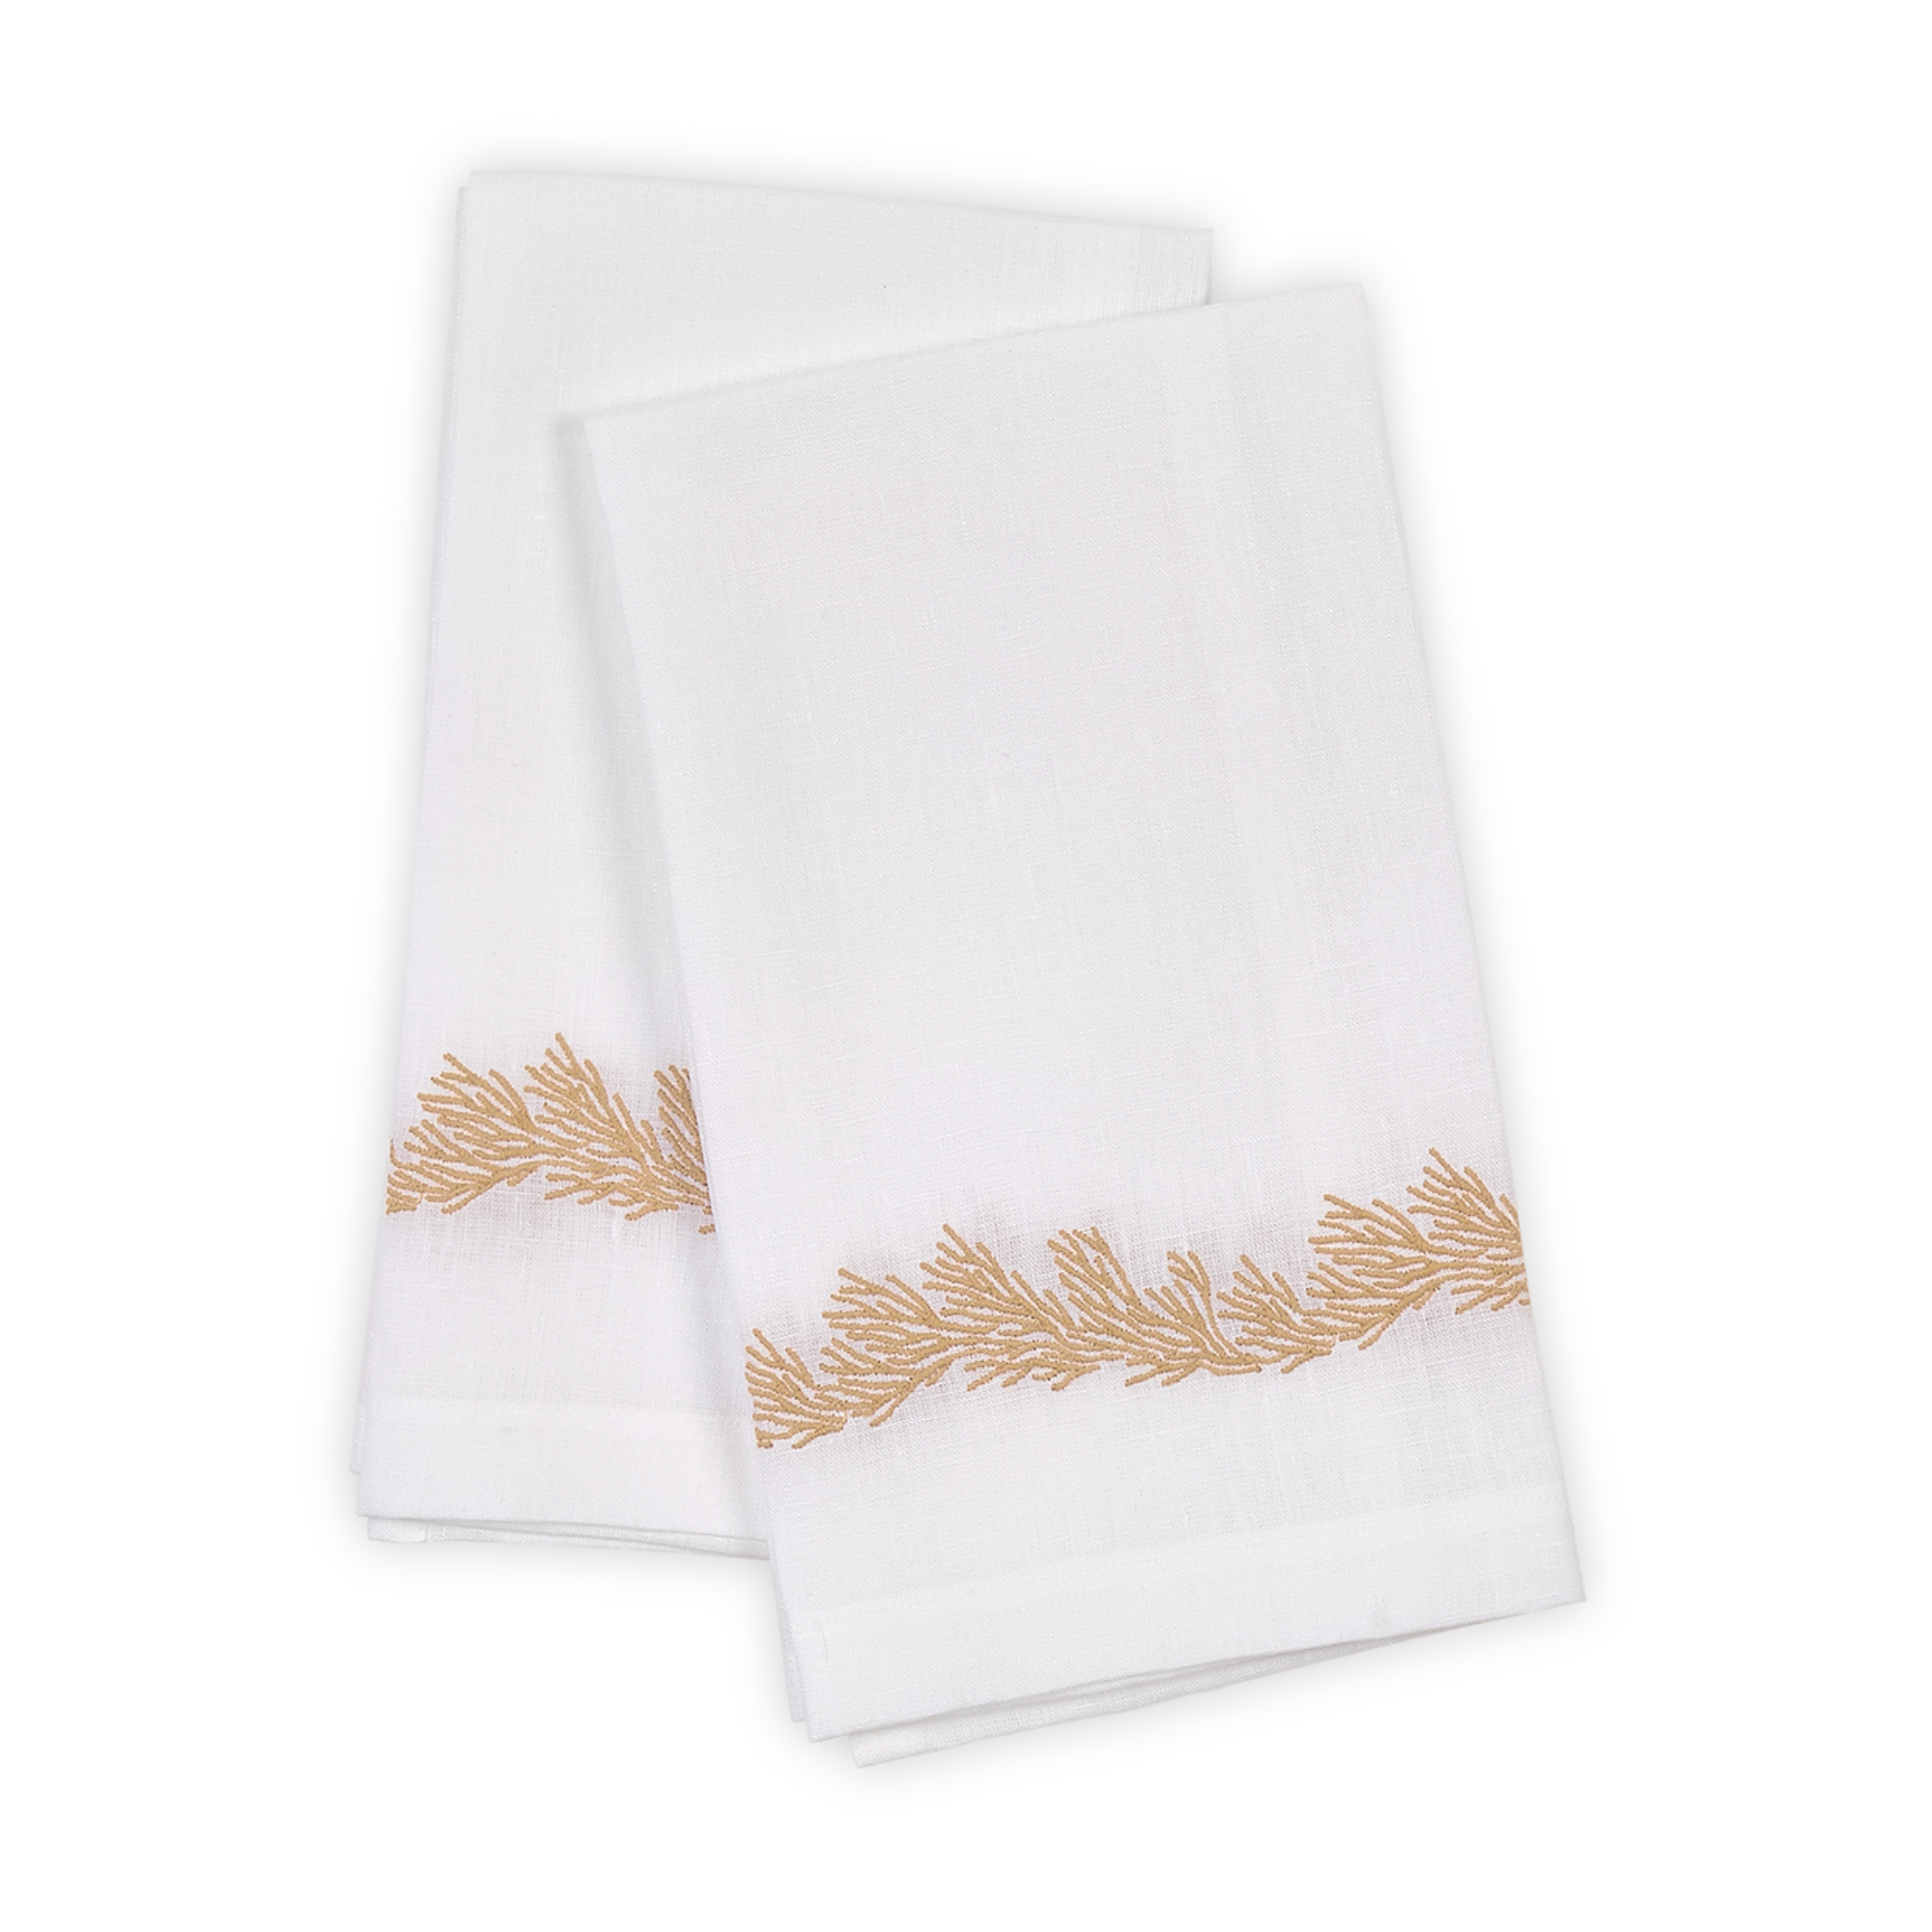 Set of 2 Folded Matouk Atoll Guest Towels in Linen Color